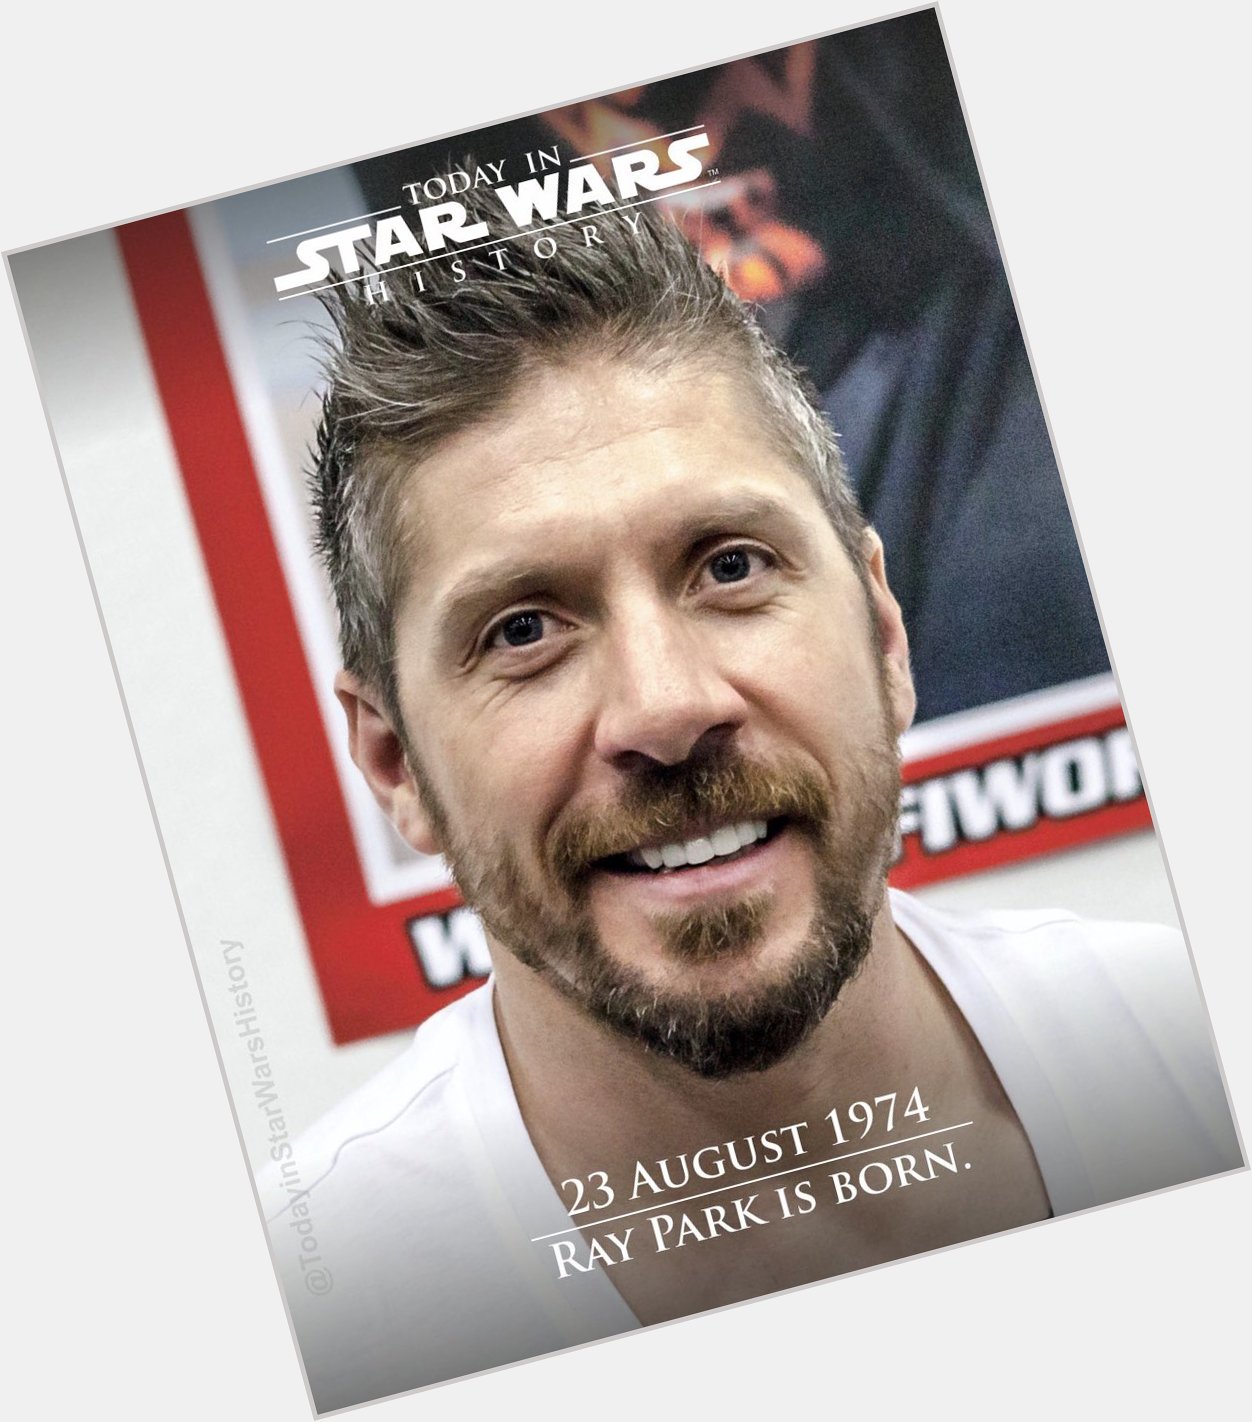 23 August 1974 At last we will reveal our happy birthday wishes to Ray Park! 